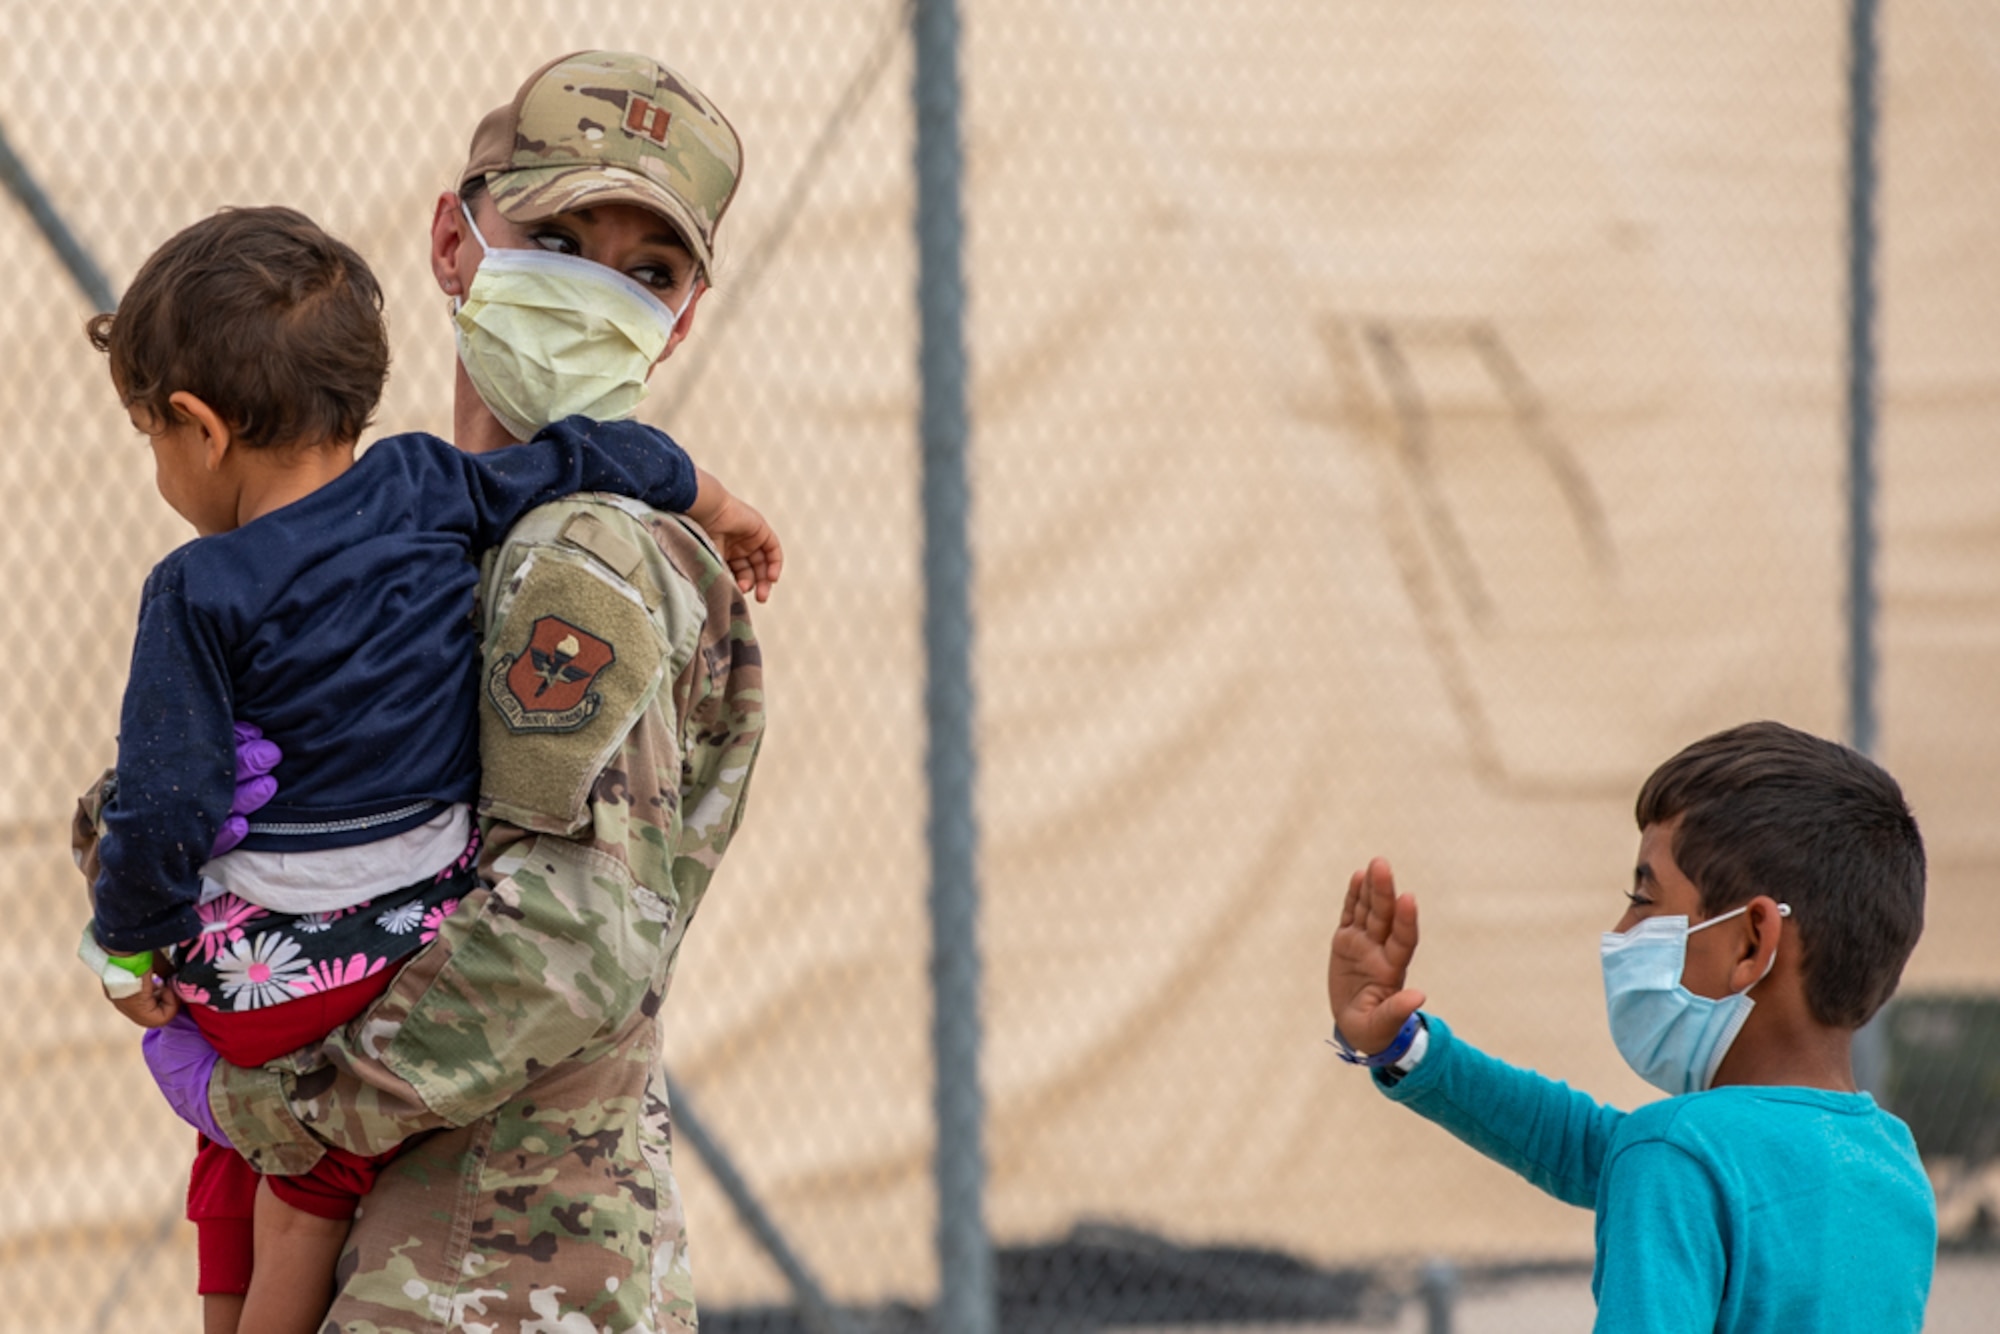 An Airman attached to Task Force-Holloman aids Afghan children as they arrive to Holloman Air Force Base, New Mexico, Sept. 2, 2021. The Department of Defense, through U.S. Northern Command, and in support of the Department of State and Department of Homeland Security, is providing transportation, temporary housing, medical screening, and general support for up to 50,000 Afghan evacuees at suitable facilities, in permanent or temporary structures, as quickly as possible. This initiative provides Afghan evacuees essential support at secure locations outside Afghanistan. (U.S. Army photo by Pfc. Anthony X. Sanchez)